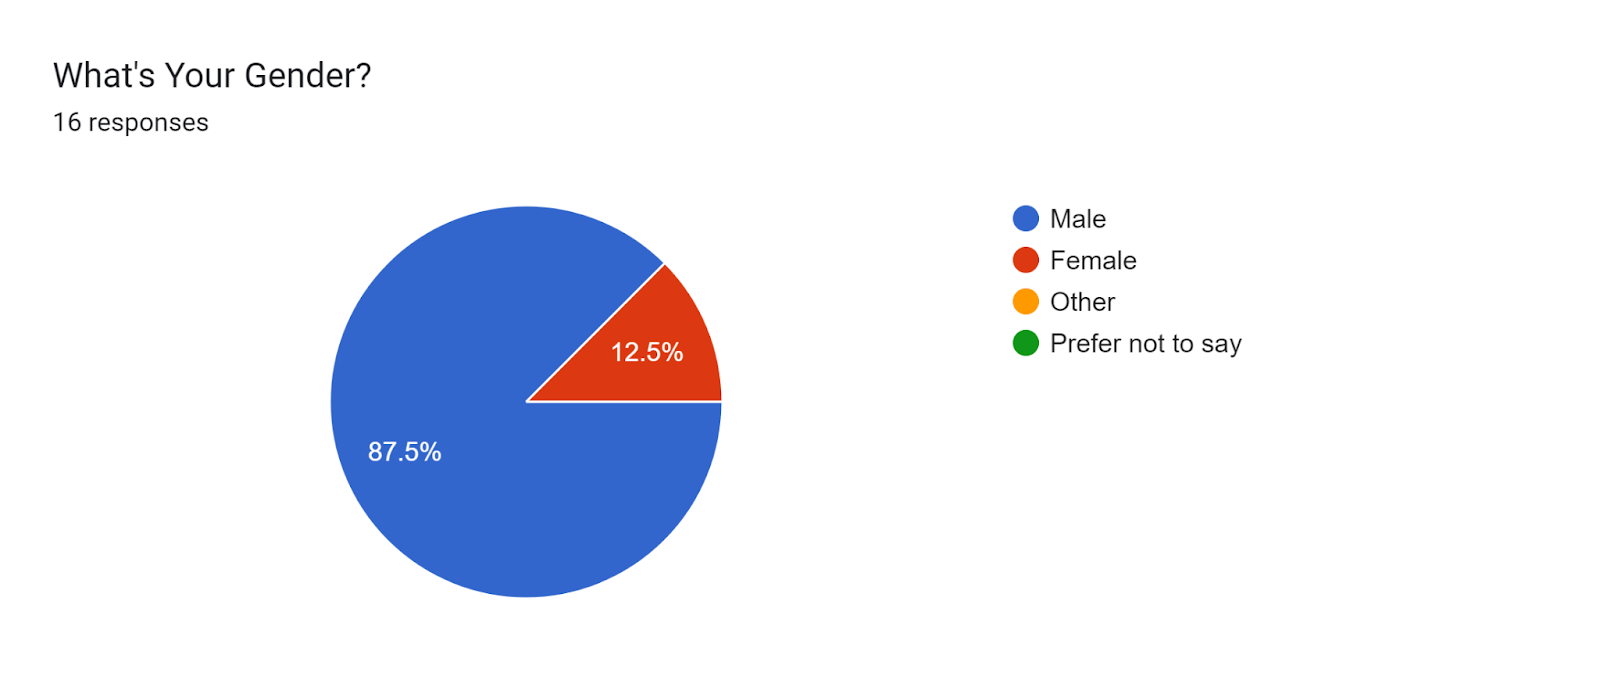 Forms response chart. Question title: What's Your Gender?. Number of responses: 16 responses.